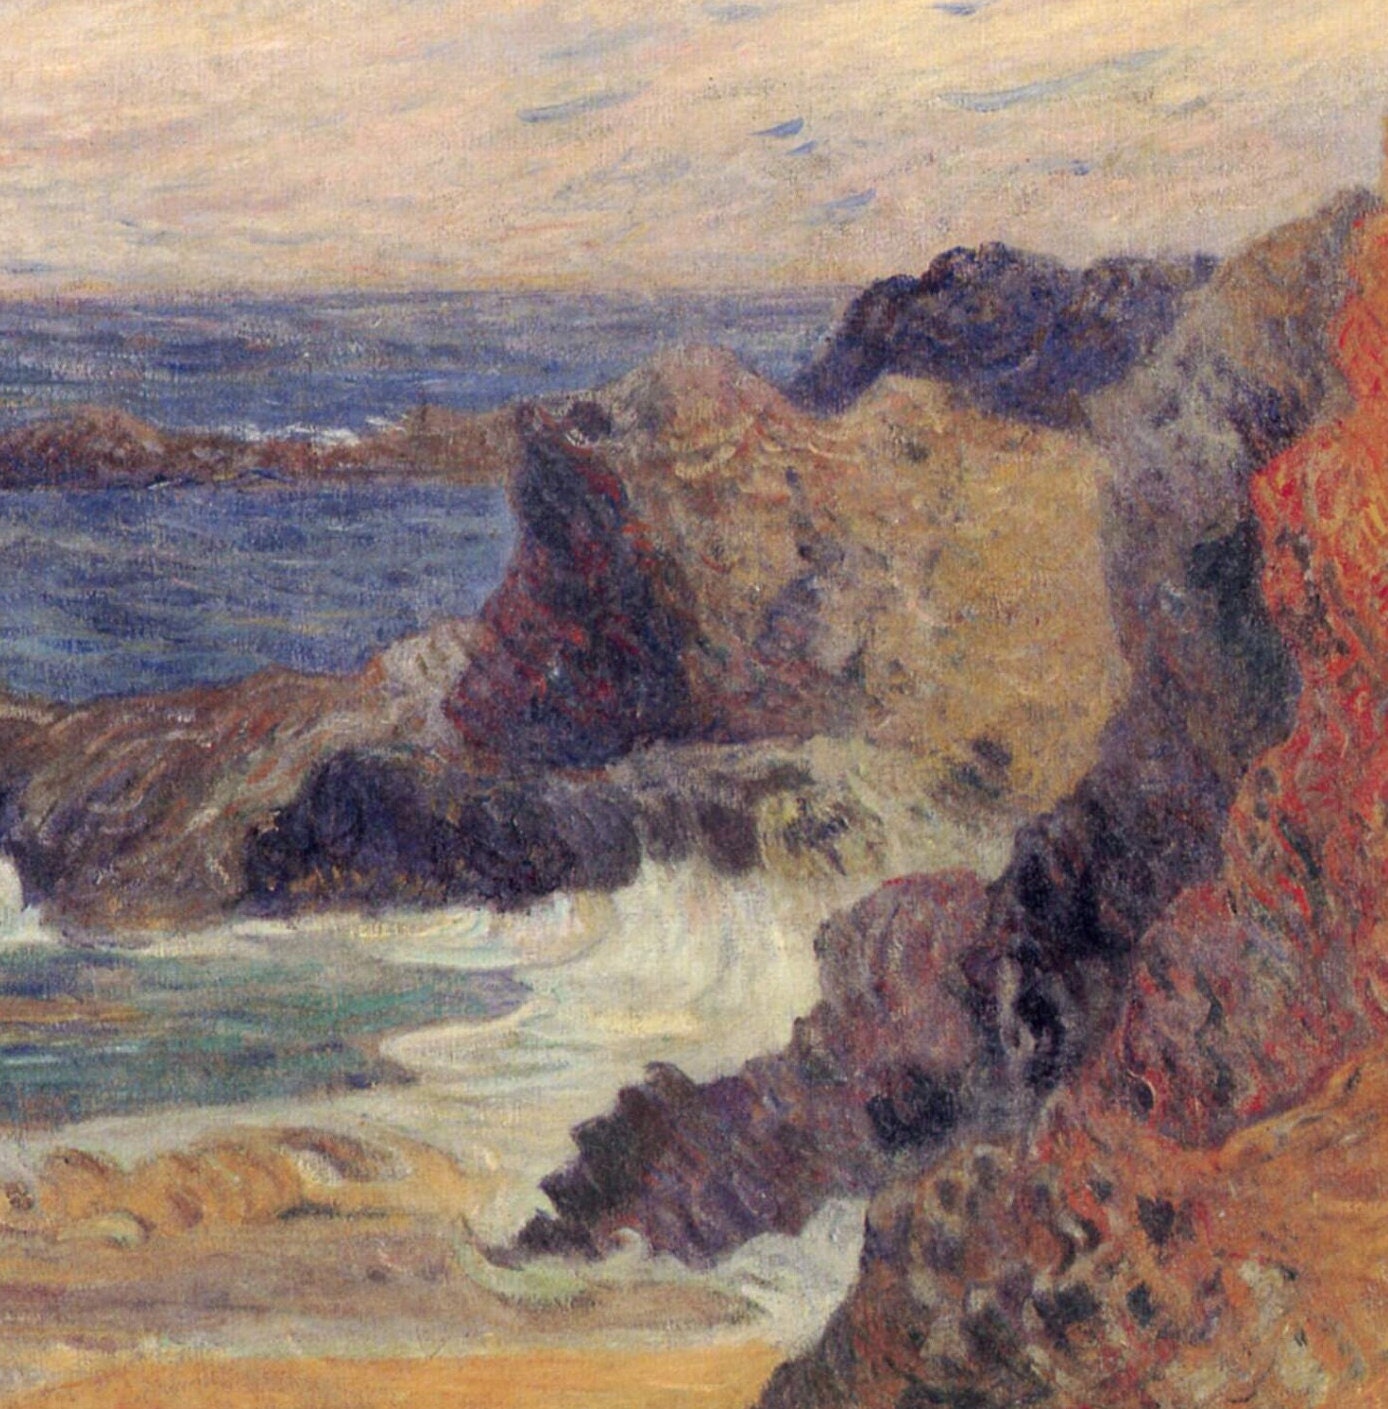 La Côte rocheuse,ou Rochers au bord de la mer by Gauguin3d Printed with texture and brush strokes looks like original oil-painting, code:827